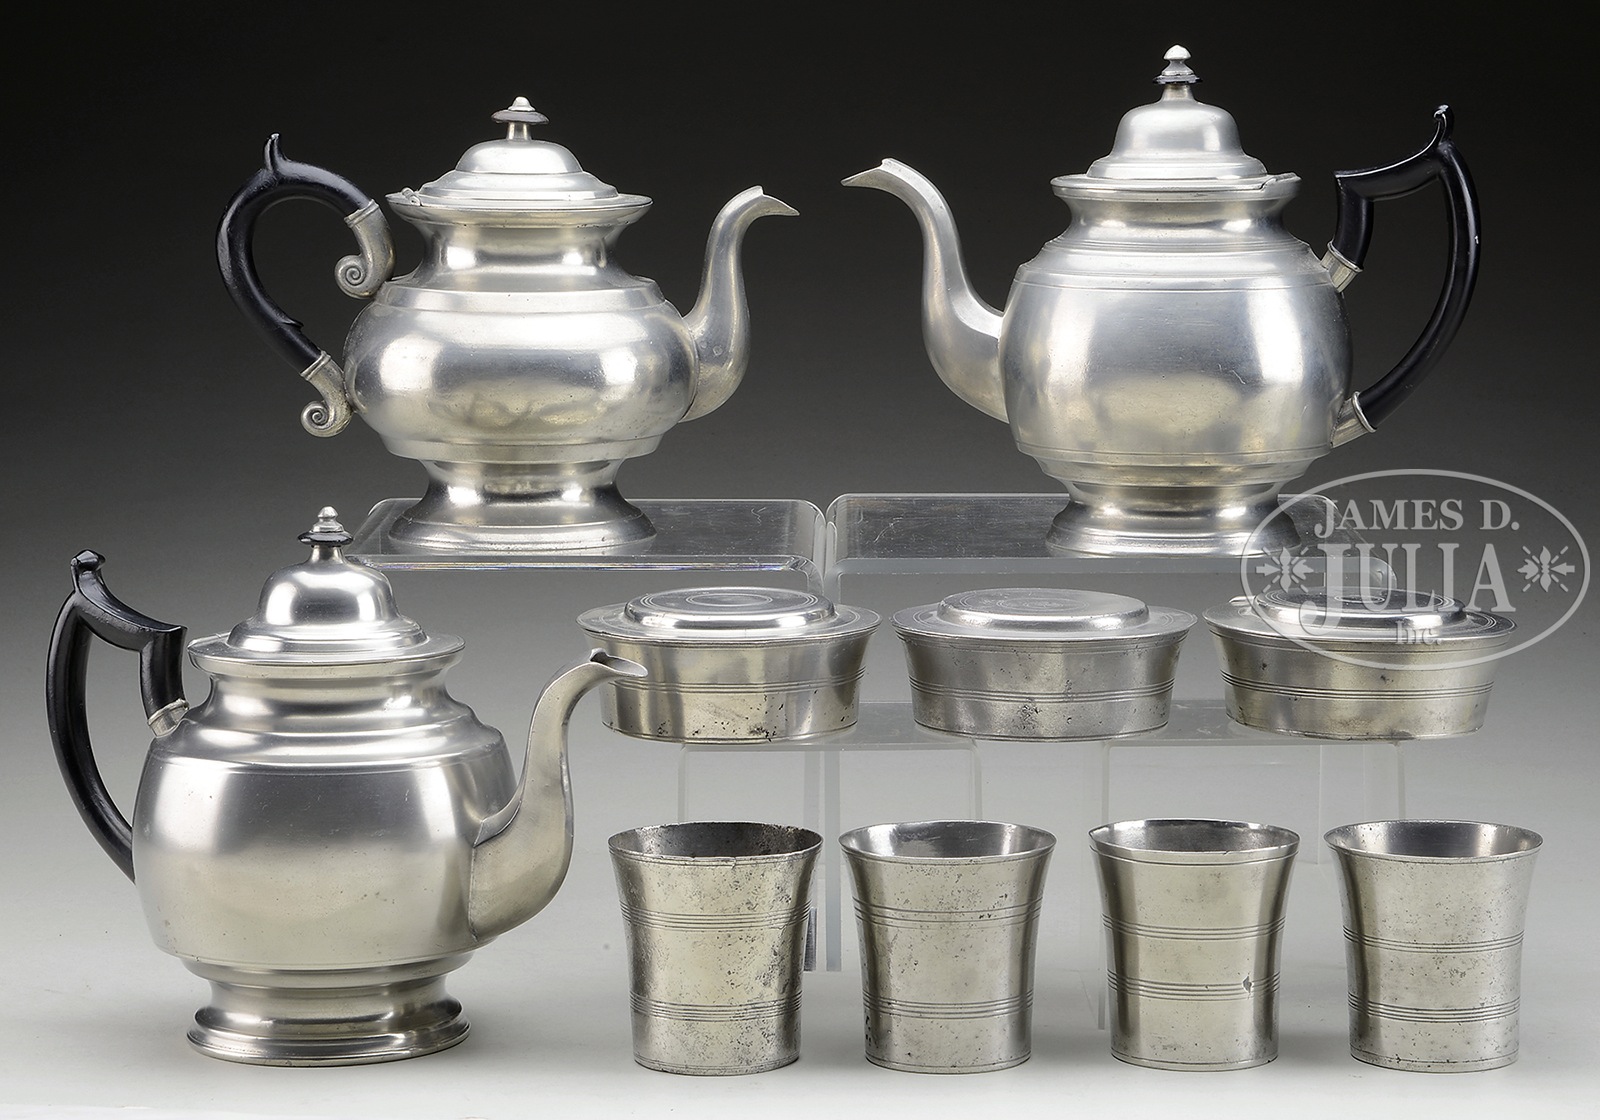 TEN PEWTER ITEMS BY ASHBIL GRISWOLD, MERIDEN, CT. Lot includes: 1-2) 7-1/4" h. teapot with domed